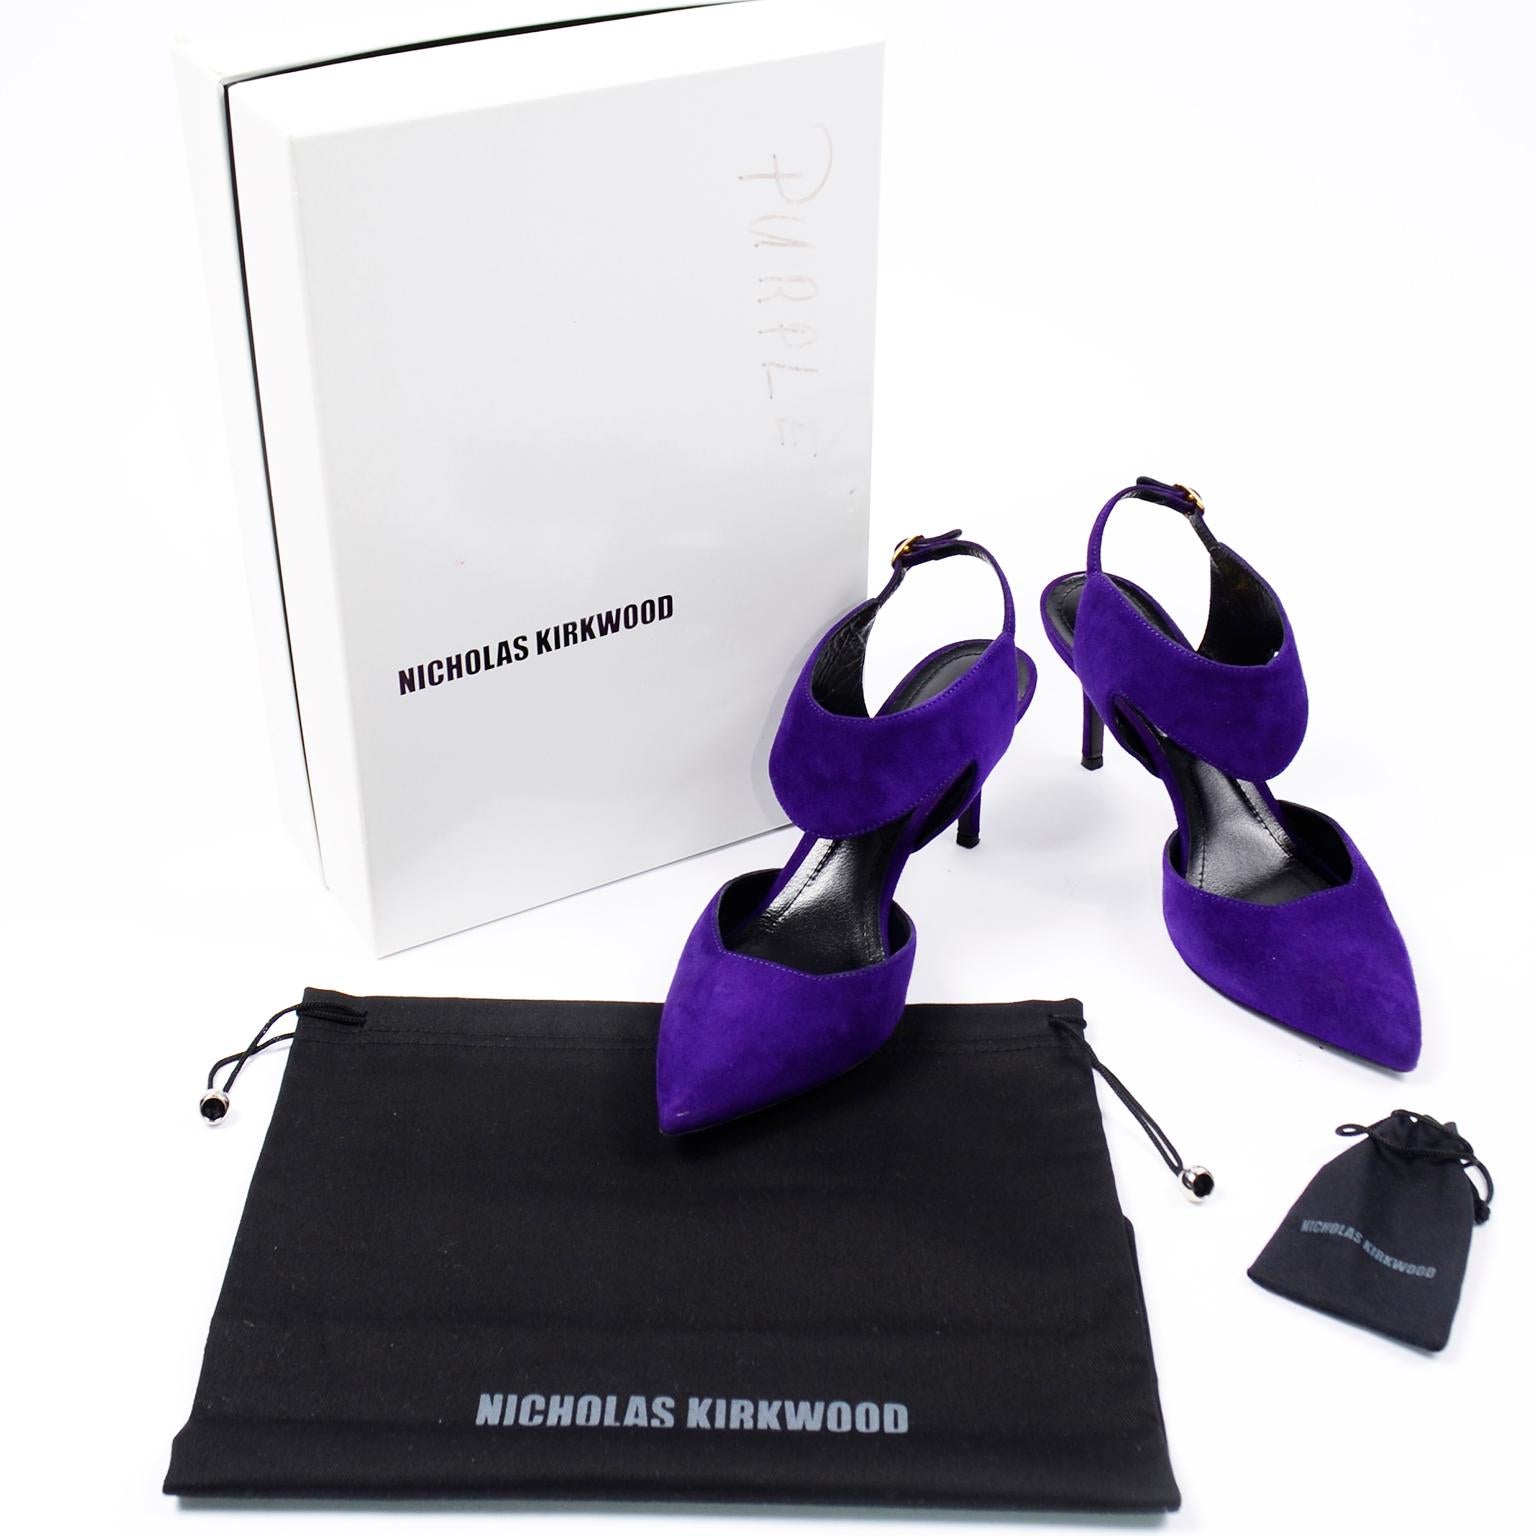 These are stunning Nicholas Kirkwood purple suede leather pointed toe heels with adjustable ankle strap. These shoes come with their original box, dustbag, and heel tips. The purple suede is perfectly accented with gold tone hardware. We love the